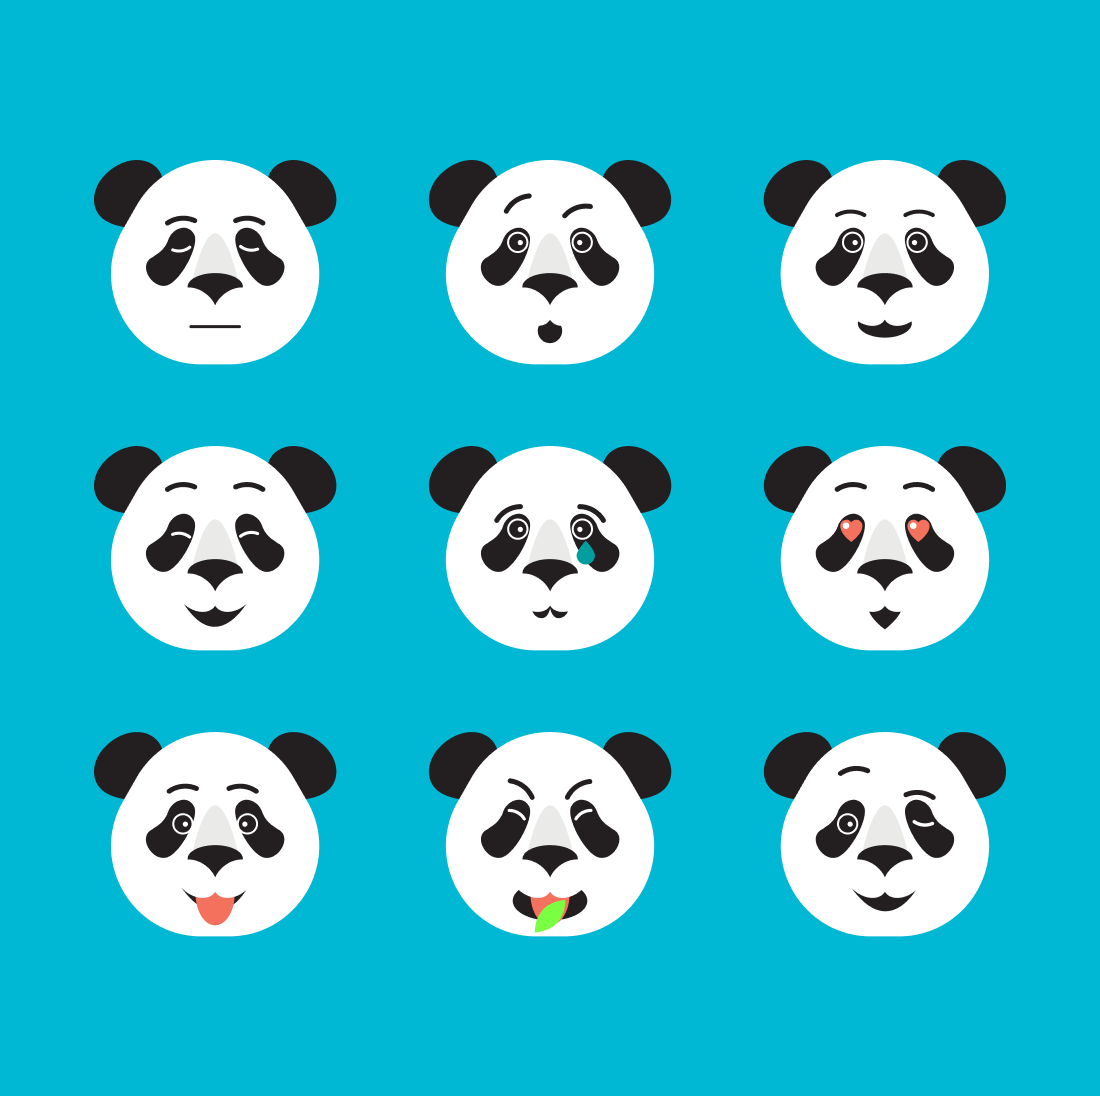 Bunch of panda bears with different facial expressions.